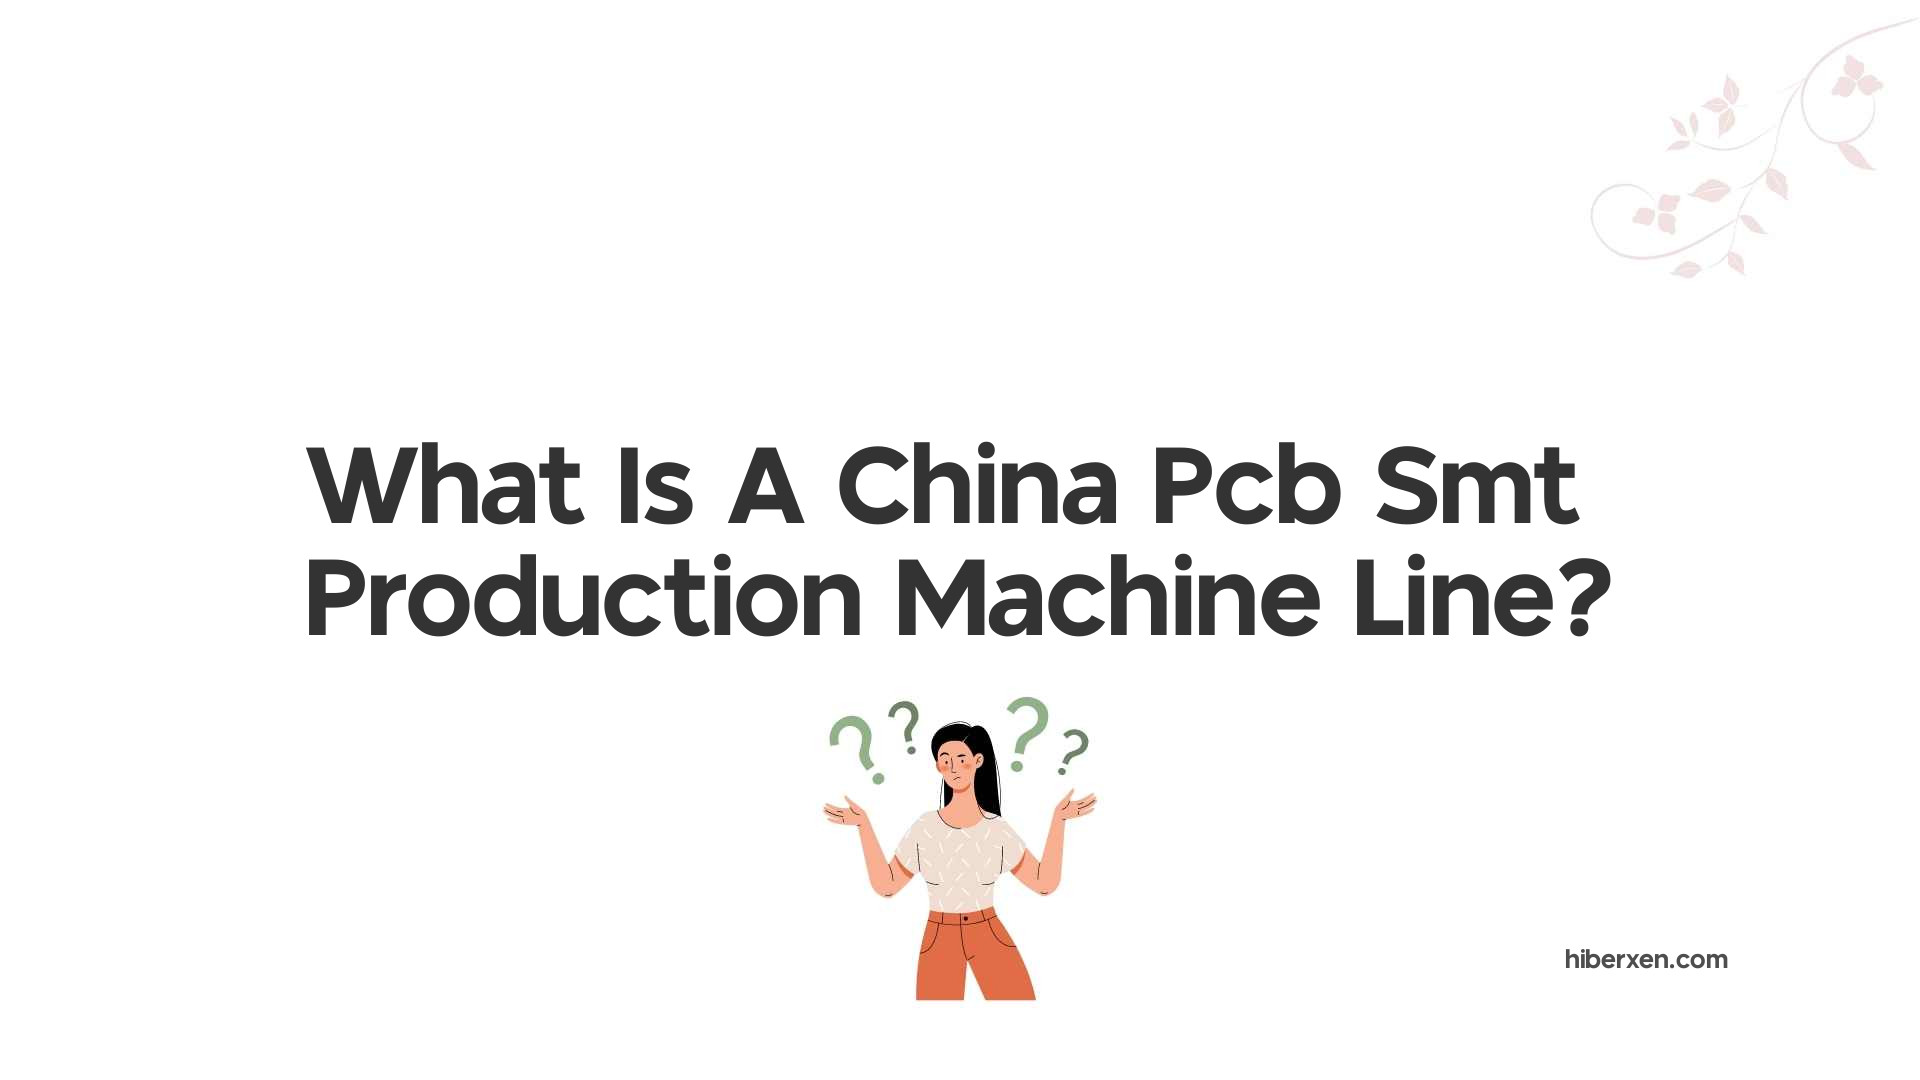 What Is A China Pcb Smt Production Machine Line?